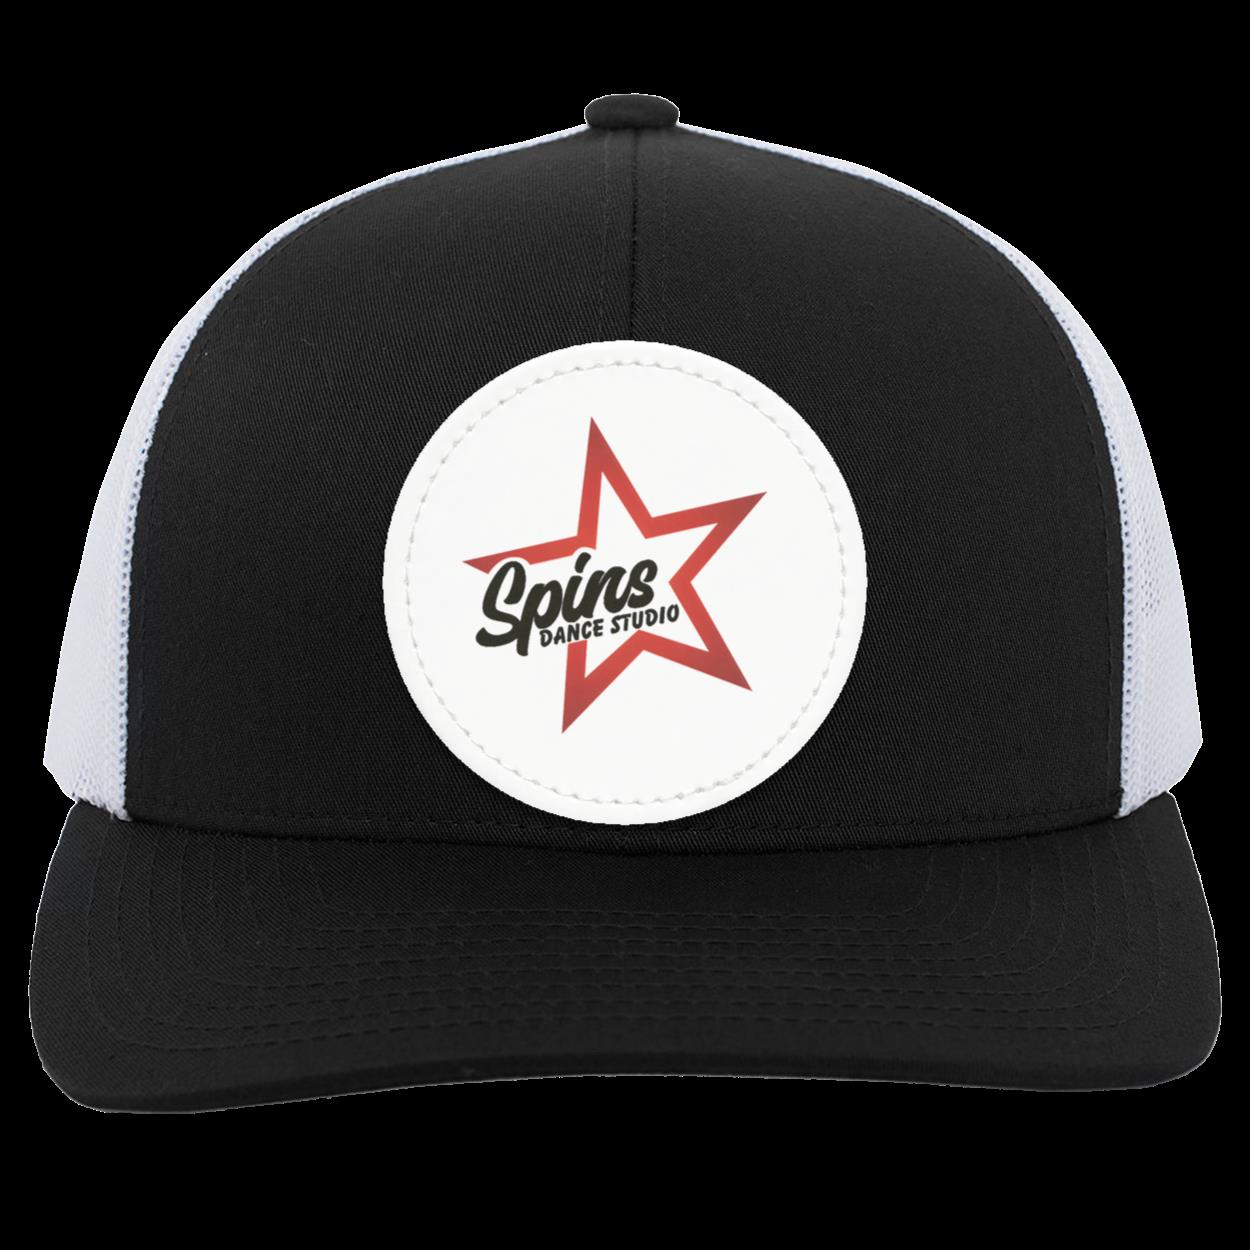 Spins Trucker Snap Back - Vegan Leather Patch